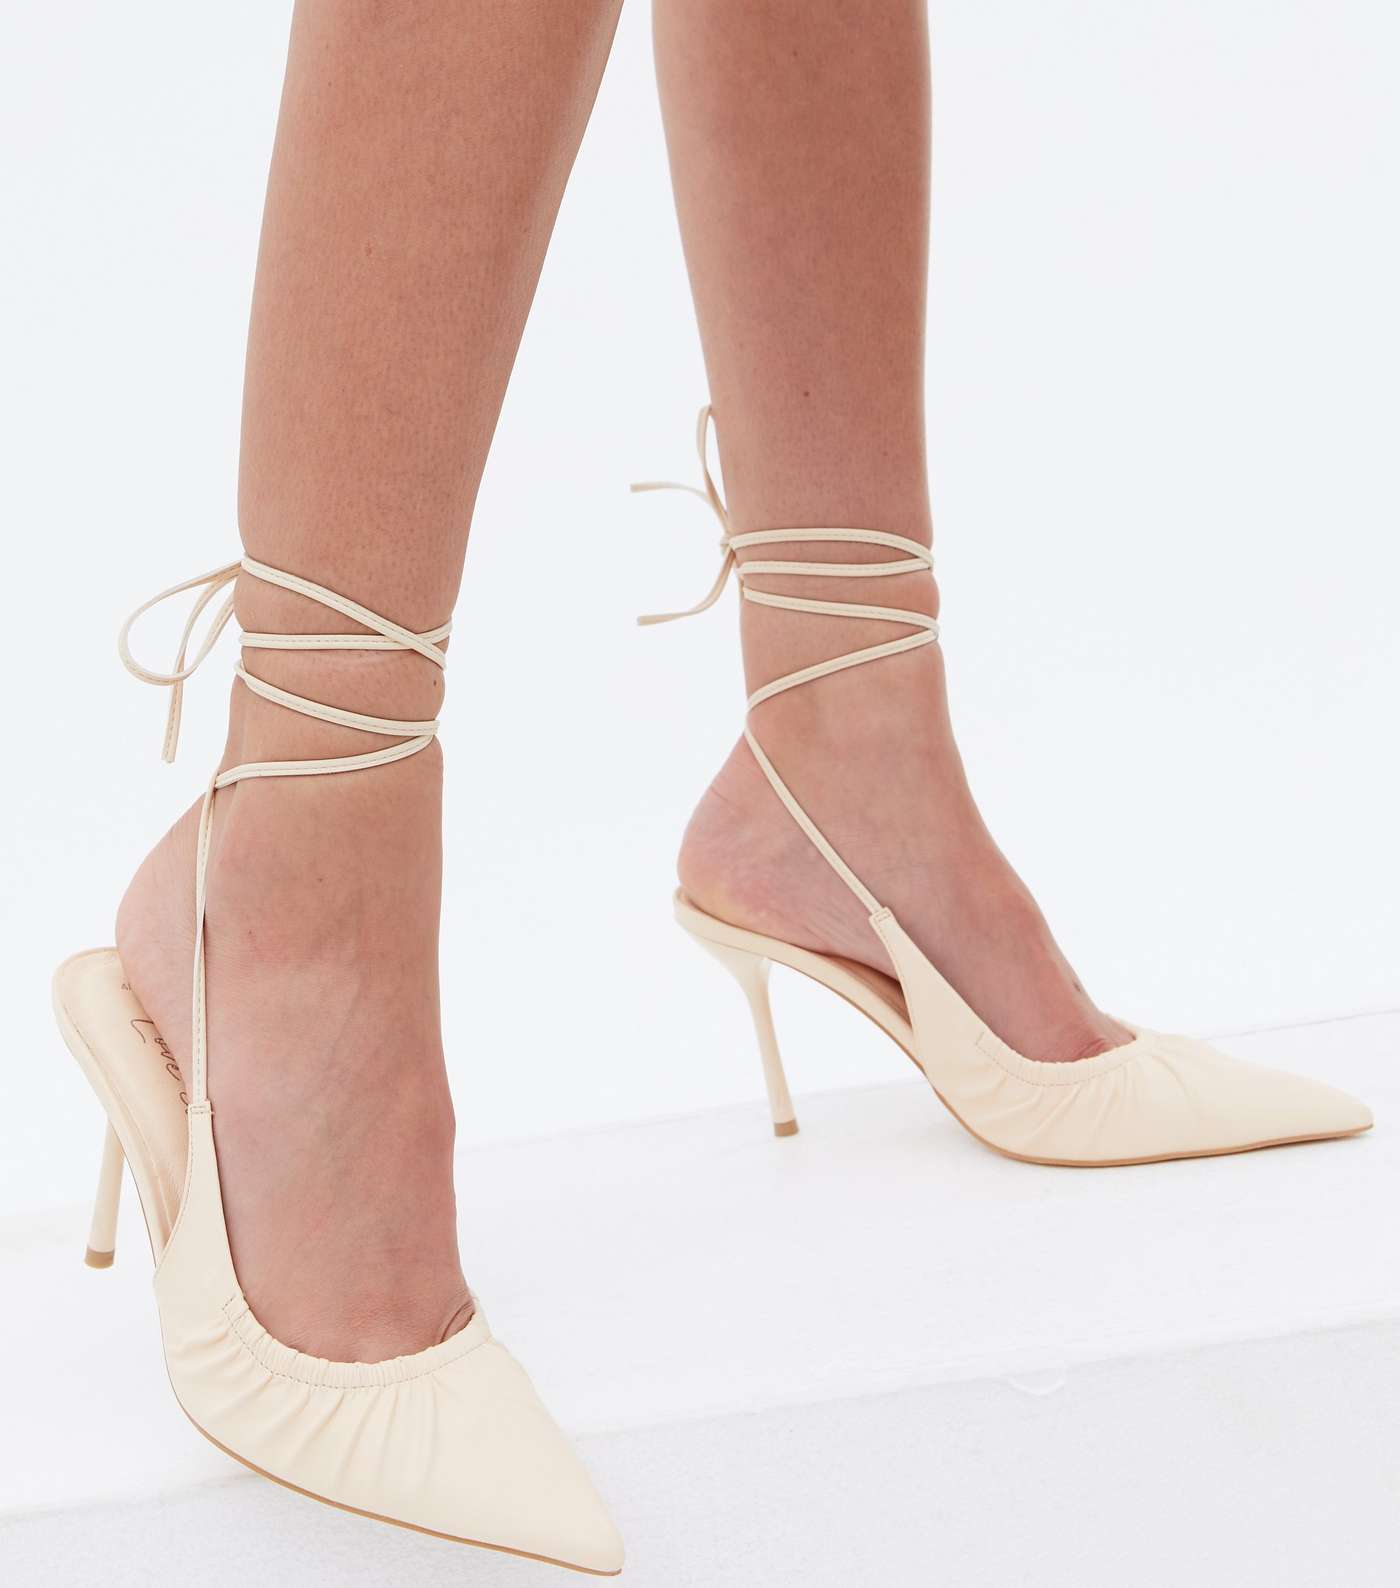 Off White Ruched Pointed Tie Stiletto Heel Court Shoes Image 2